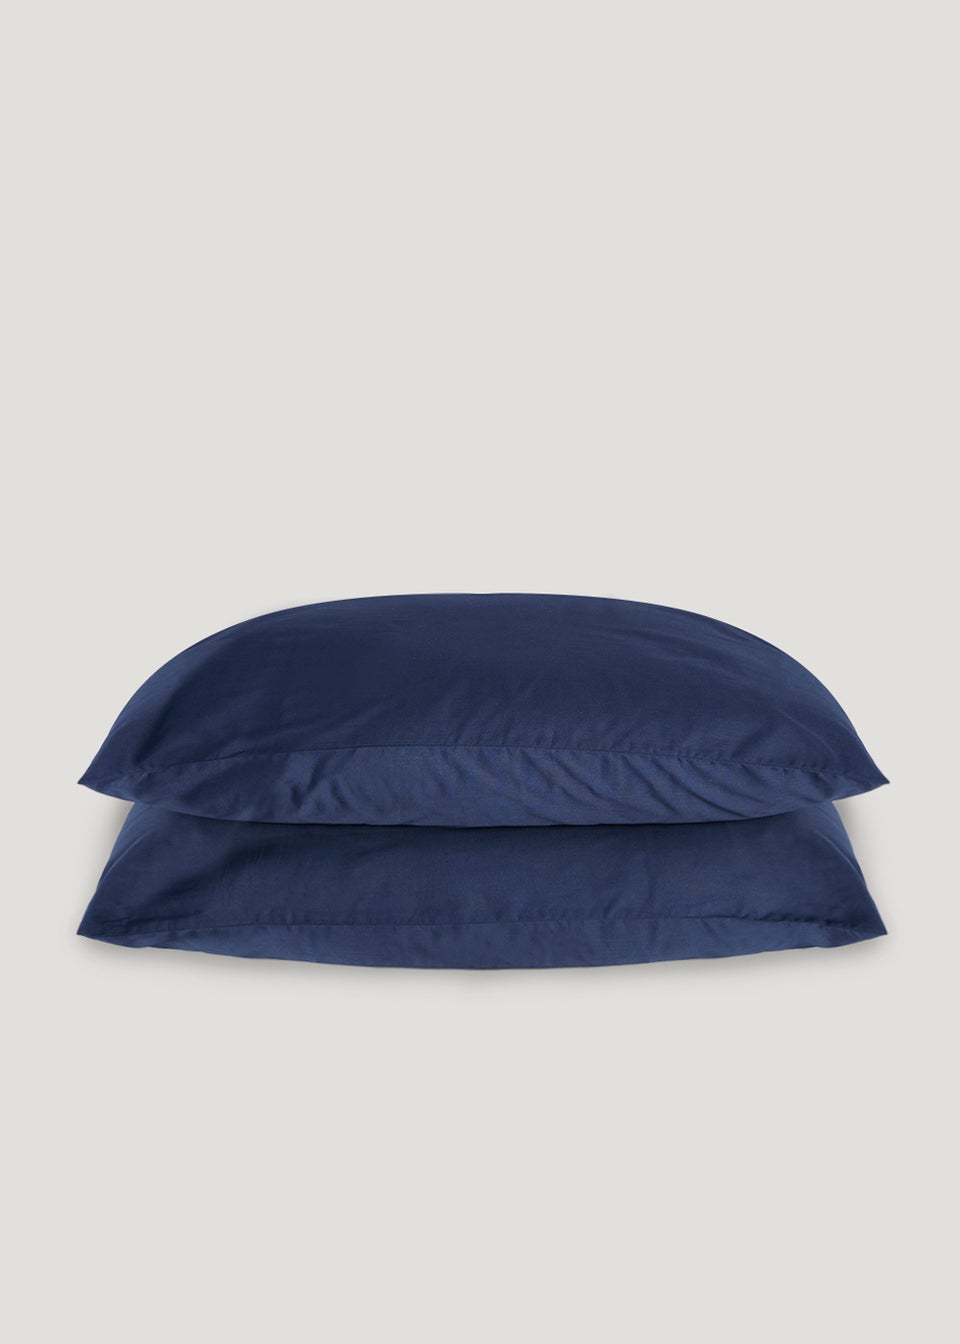 Navy Polycotton Housewife Pillowcase Pair (144 Thread Count)